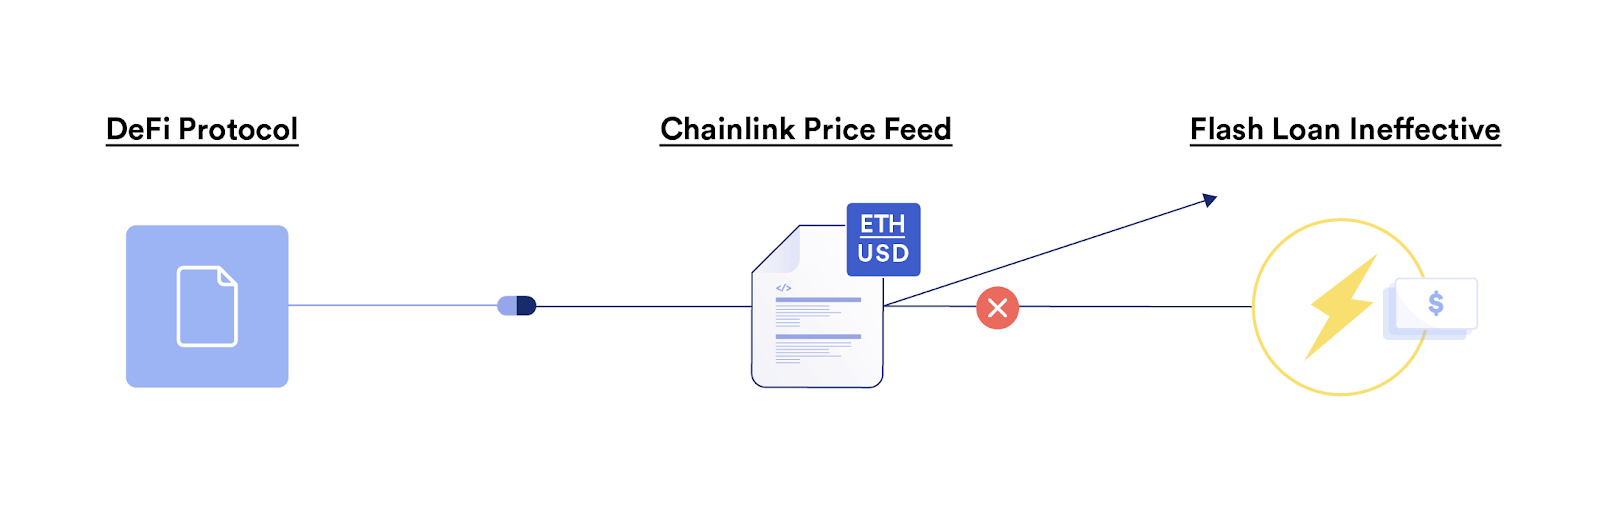 Flash loans are ineffective against Chainlink Price Feeds